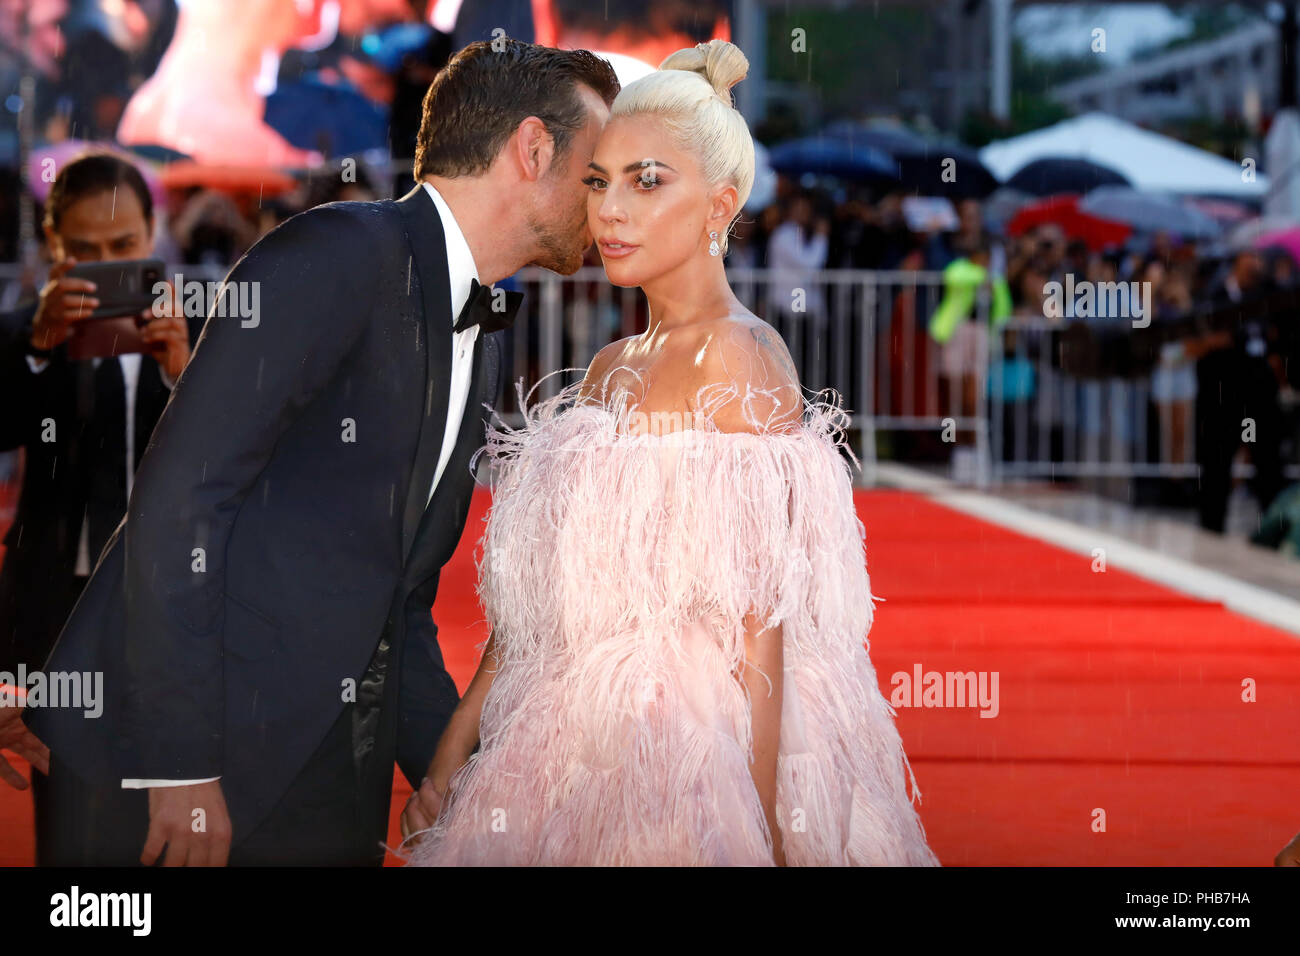 Venice, Italy. 31st Aug, 2018. Bradley Cooper, Lady Gaga attend the 'A Star Is Born' premiere during the 75th Venice Film Festival at the Palazzo del Cinema on August 31, 2018 in Venice, Italy. Credit: John Rasimus/Media Punch ***France, Sweden, Norway, Denark, Finland, Usa, Czech Republic, South America Only***/Alamy Live News Stock Photo